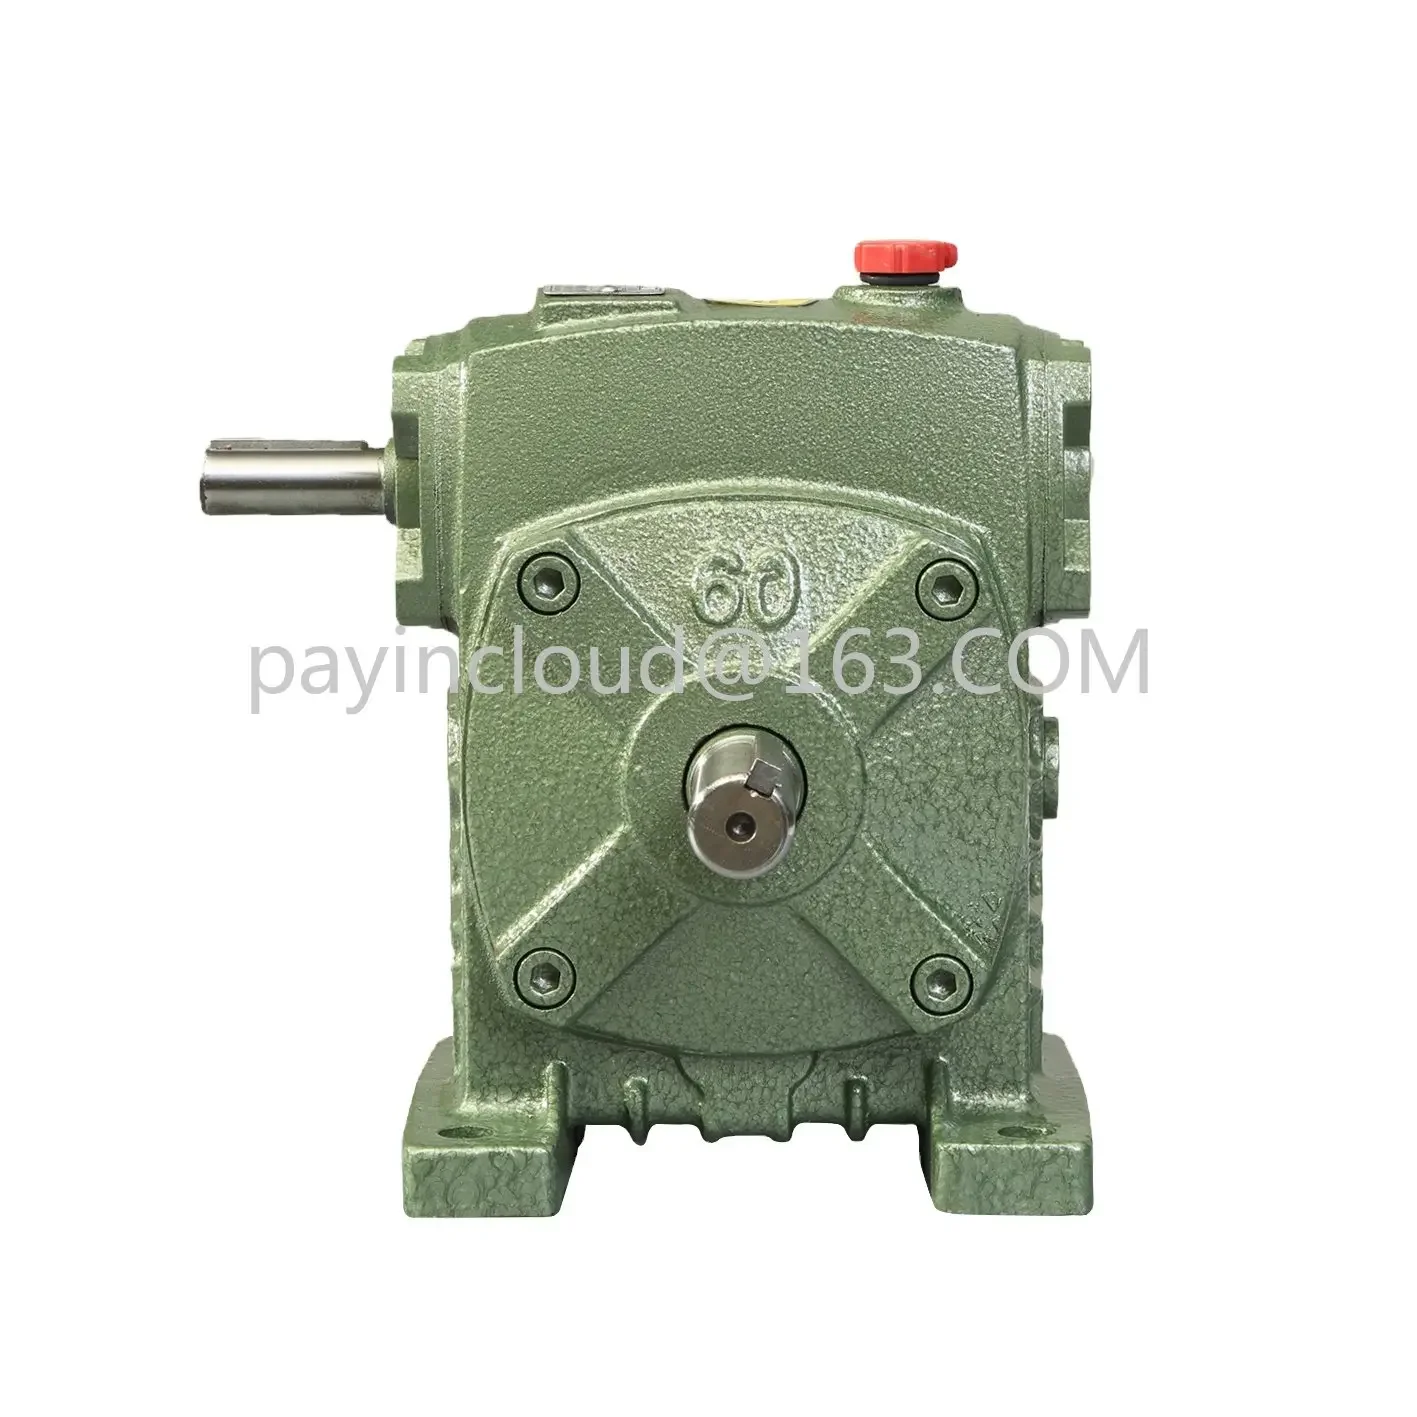 

Wpa Series Cast Iron Wpa Wp Speed Reducer High Speed Worm Gearbox Reducer